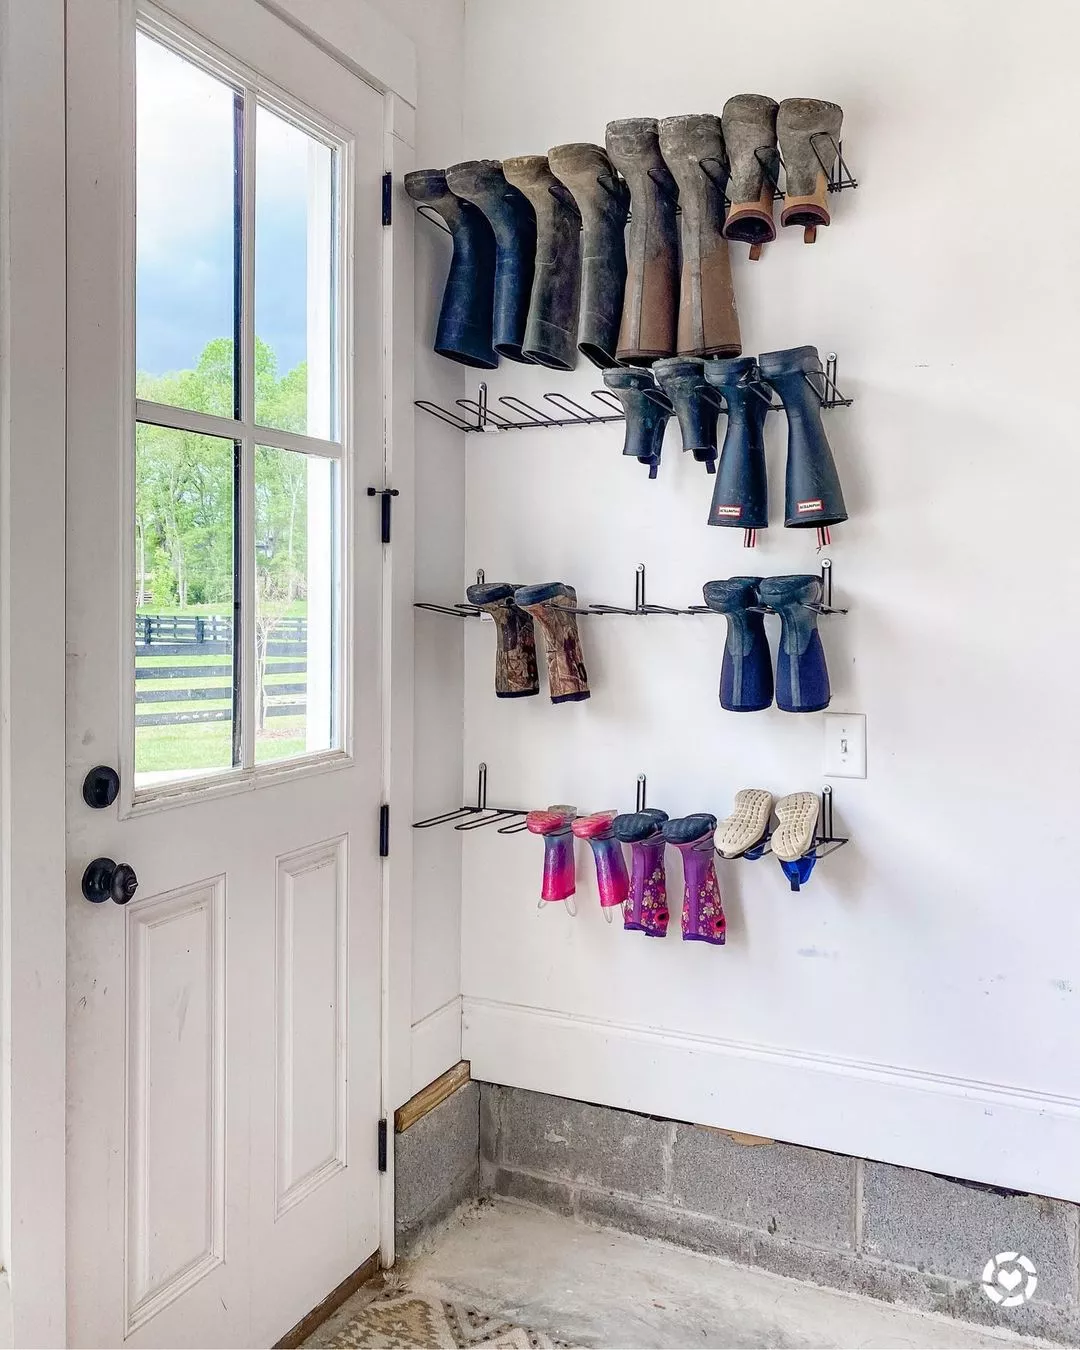 https://www.extraspace.com/blog/wp-content/uploads/2020/12/shoe-storage-ideas-dont-forget-about-your-boots.jpg.webp